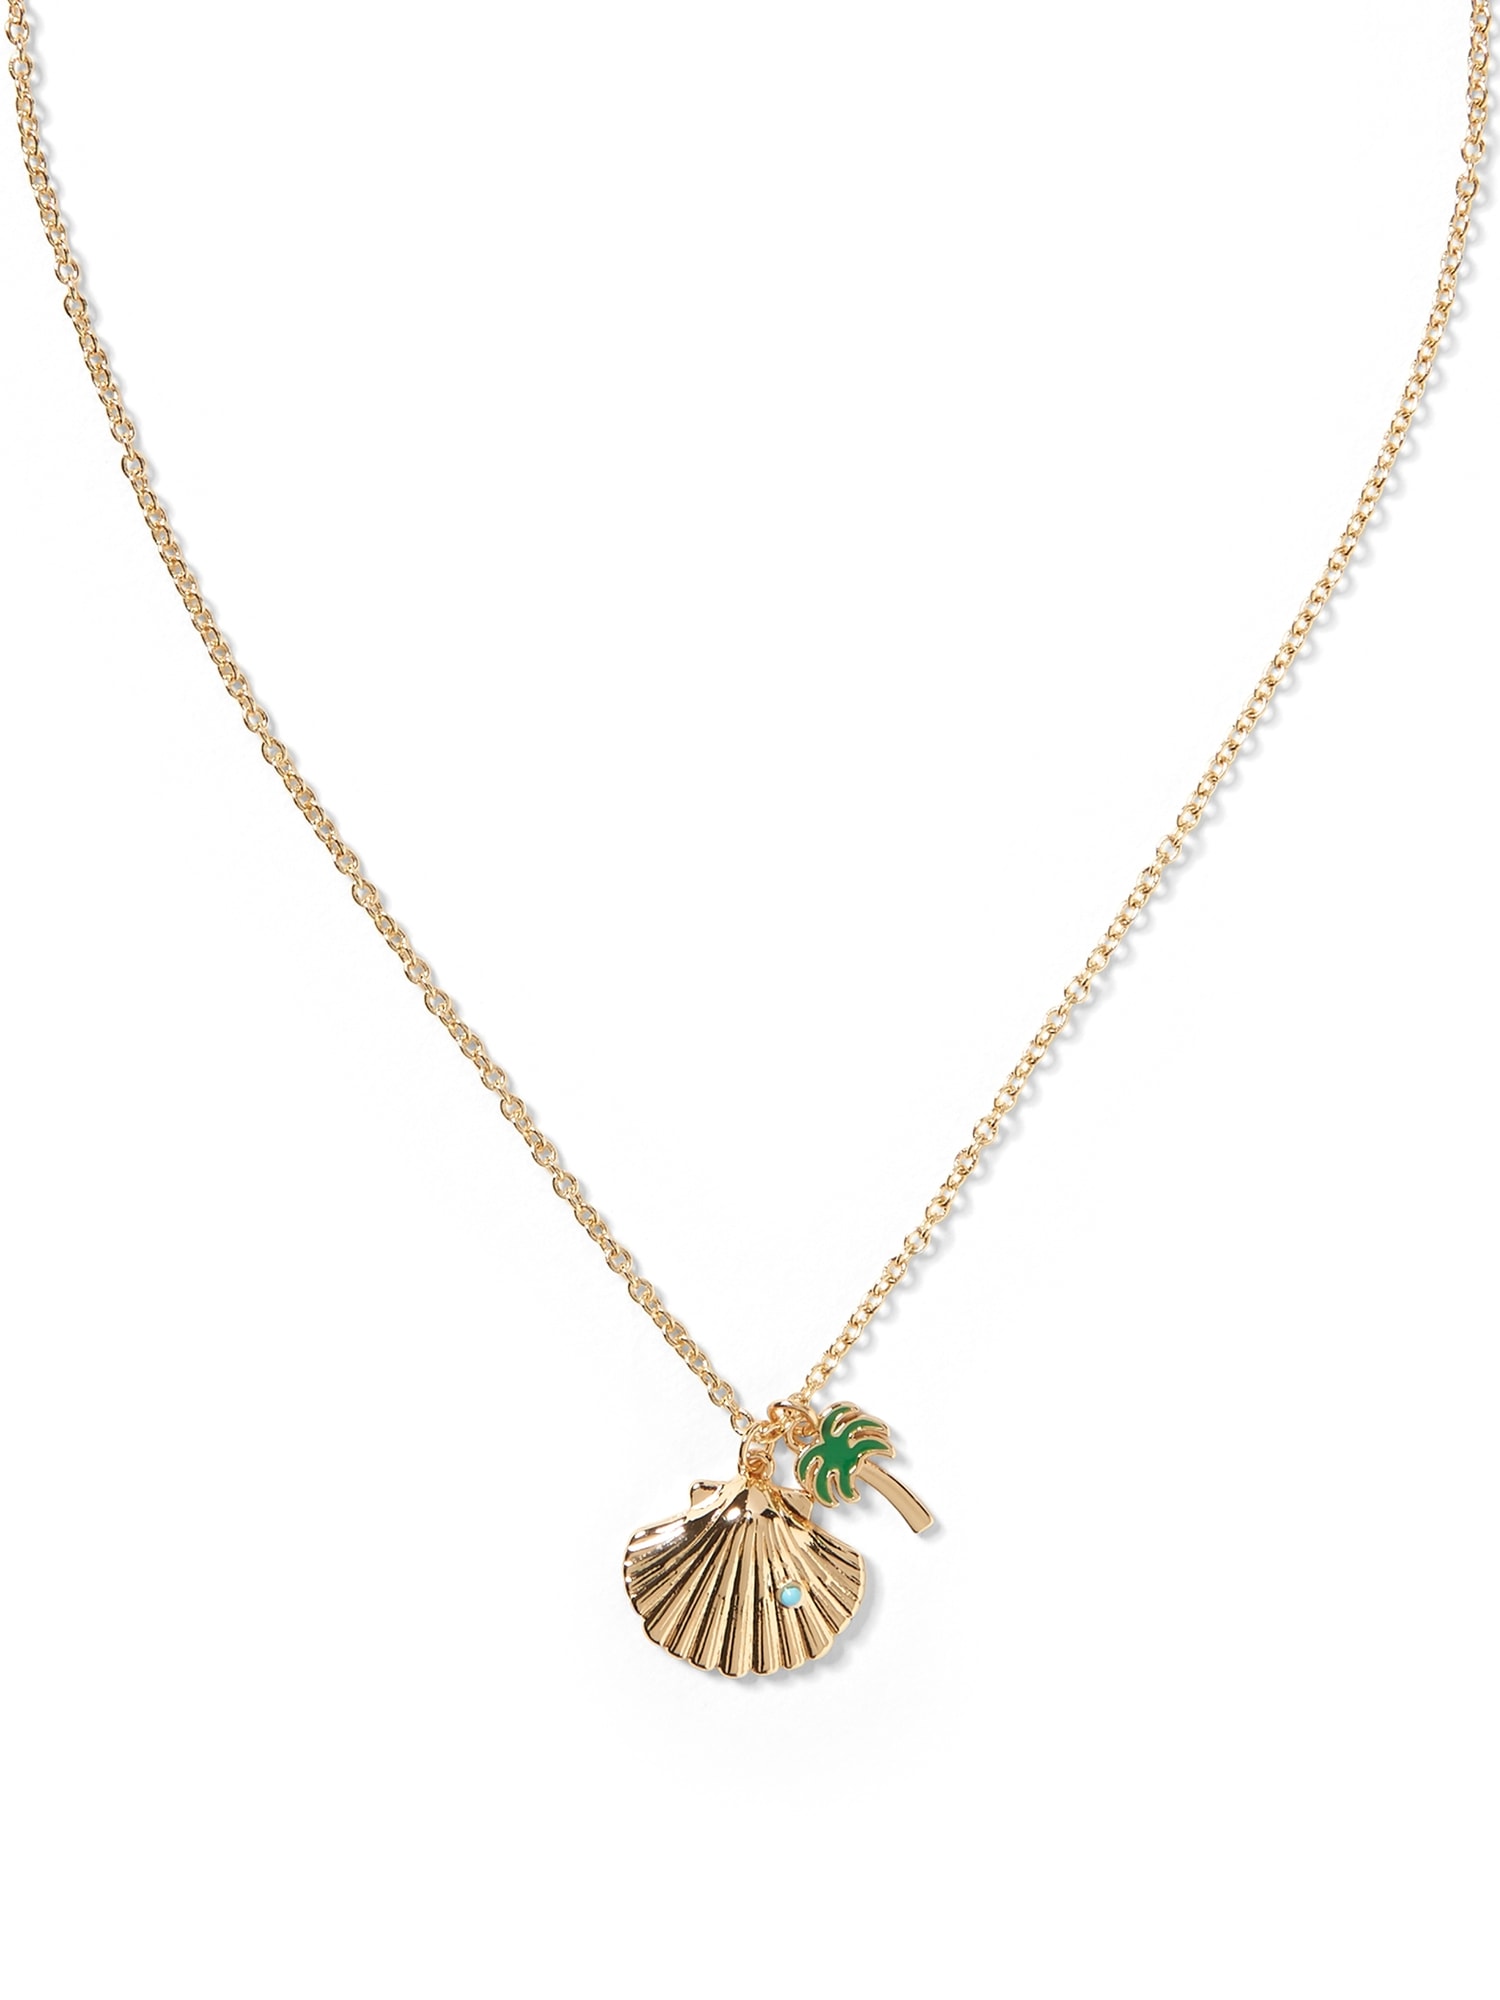 Shell & Palm Tree Charm Necklace